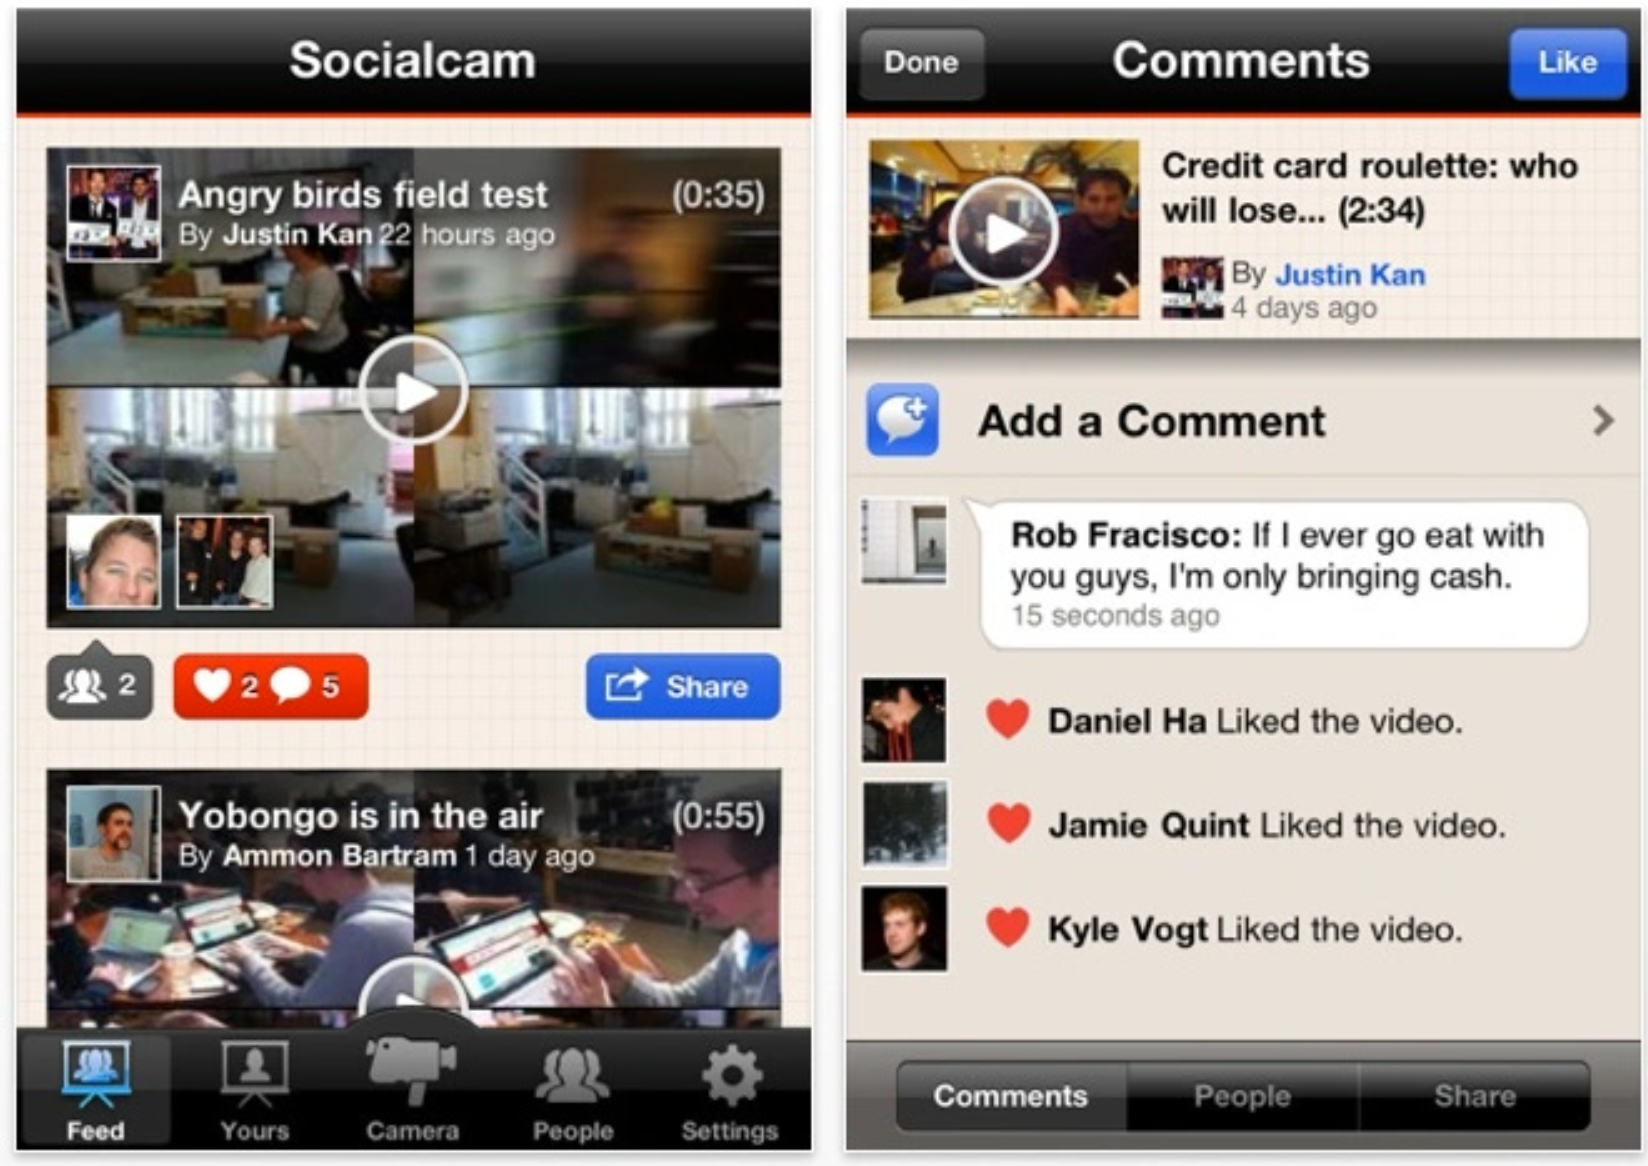 Socialcam Mobile App - communicate with your friends through videos.